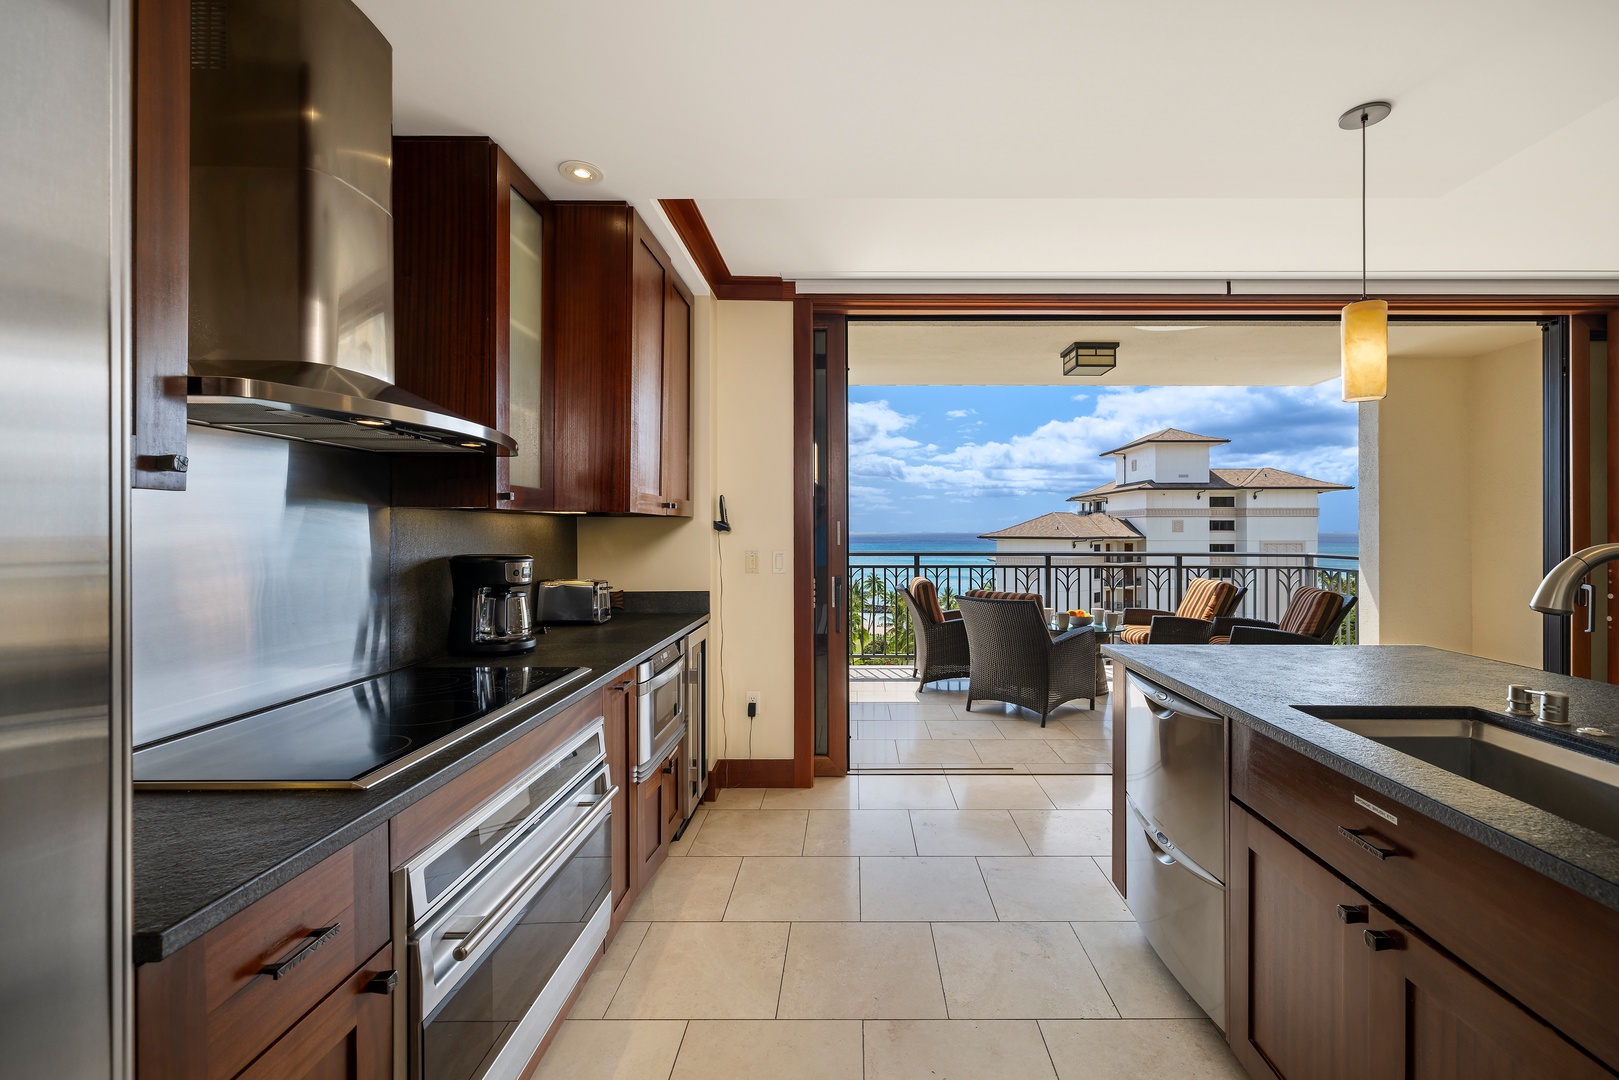 Kapolei Vacation Rentals, Ko Olina Beach Villas O1004 - Stainless steel appliances and a wine cooler for the culinary best!